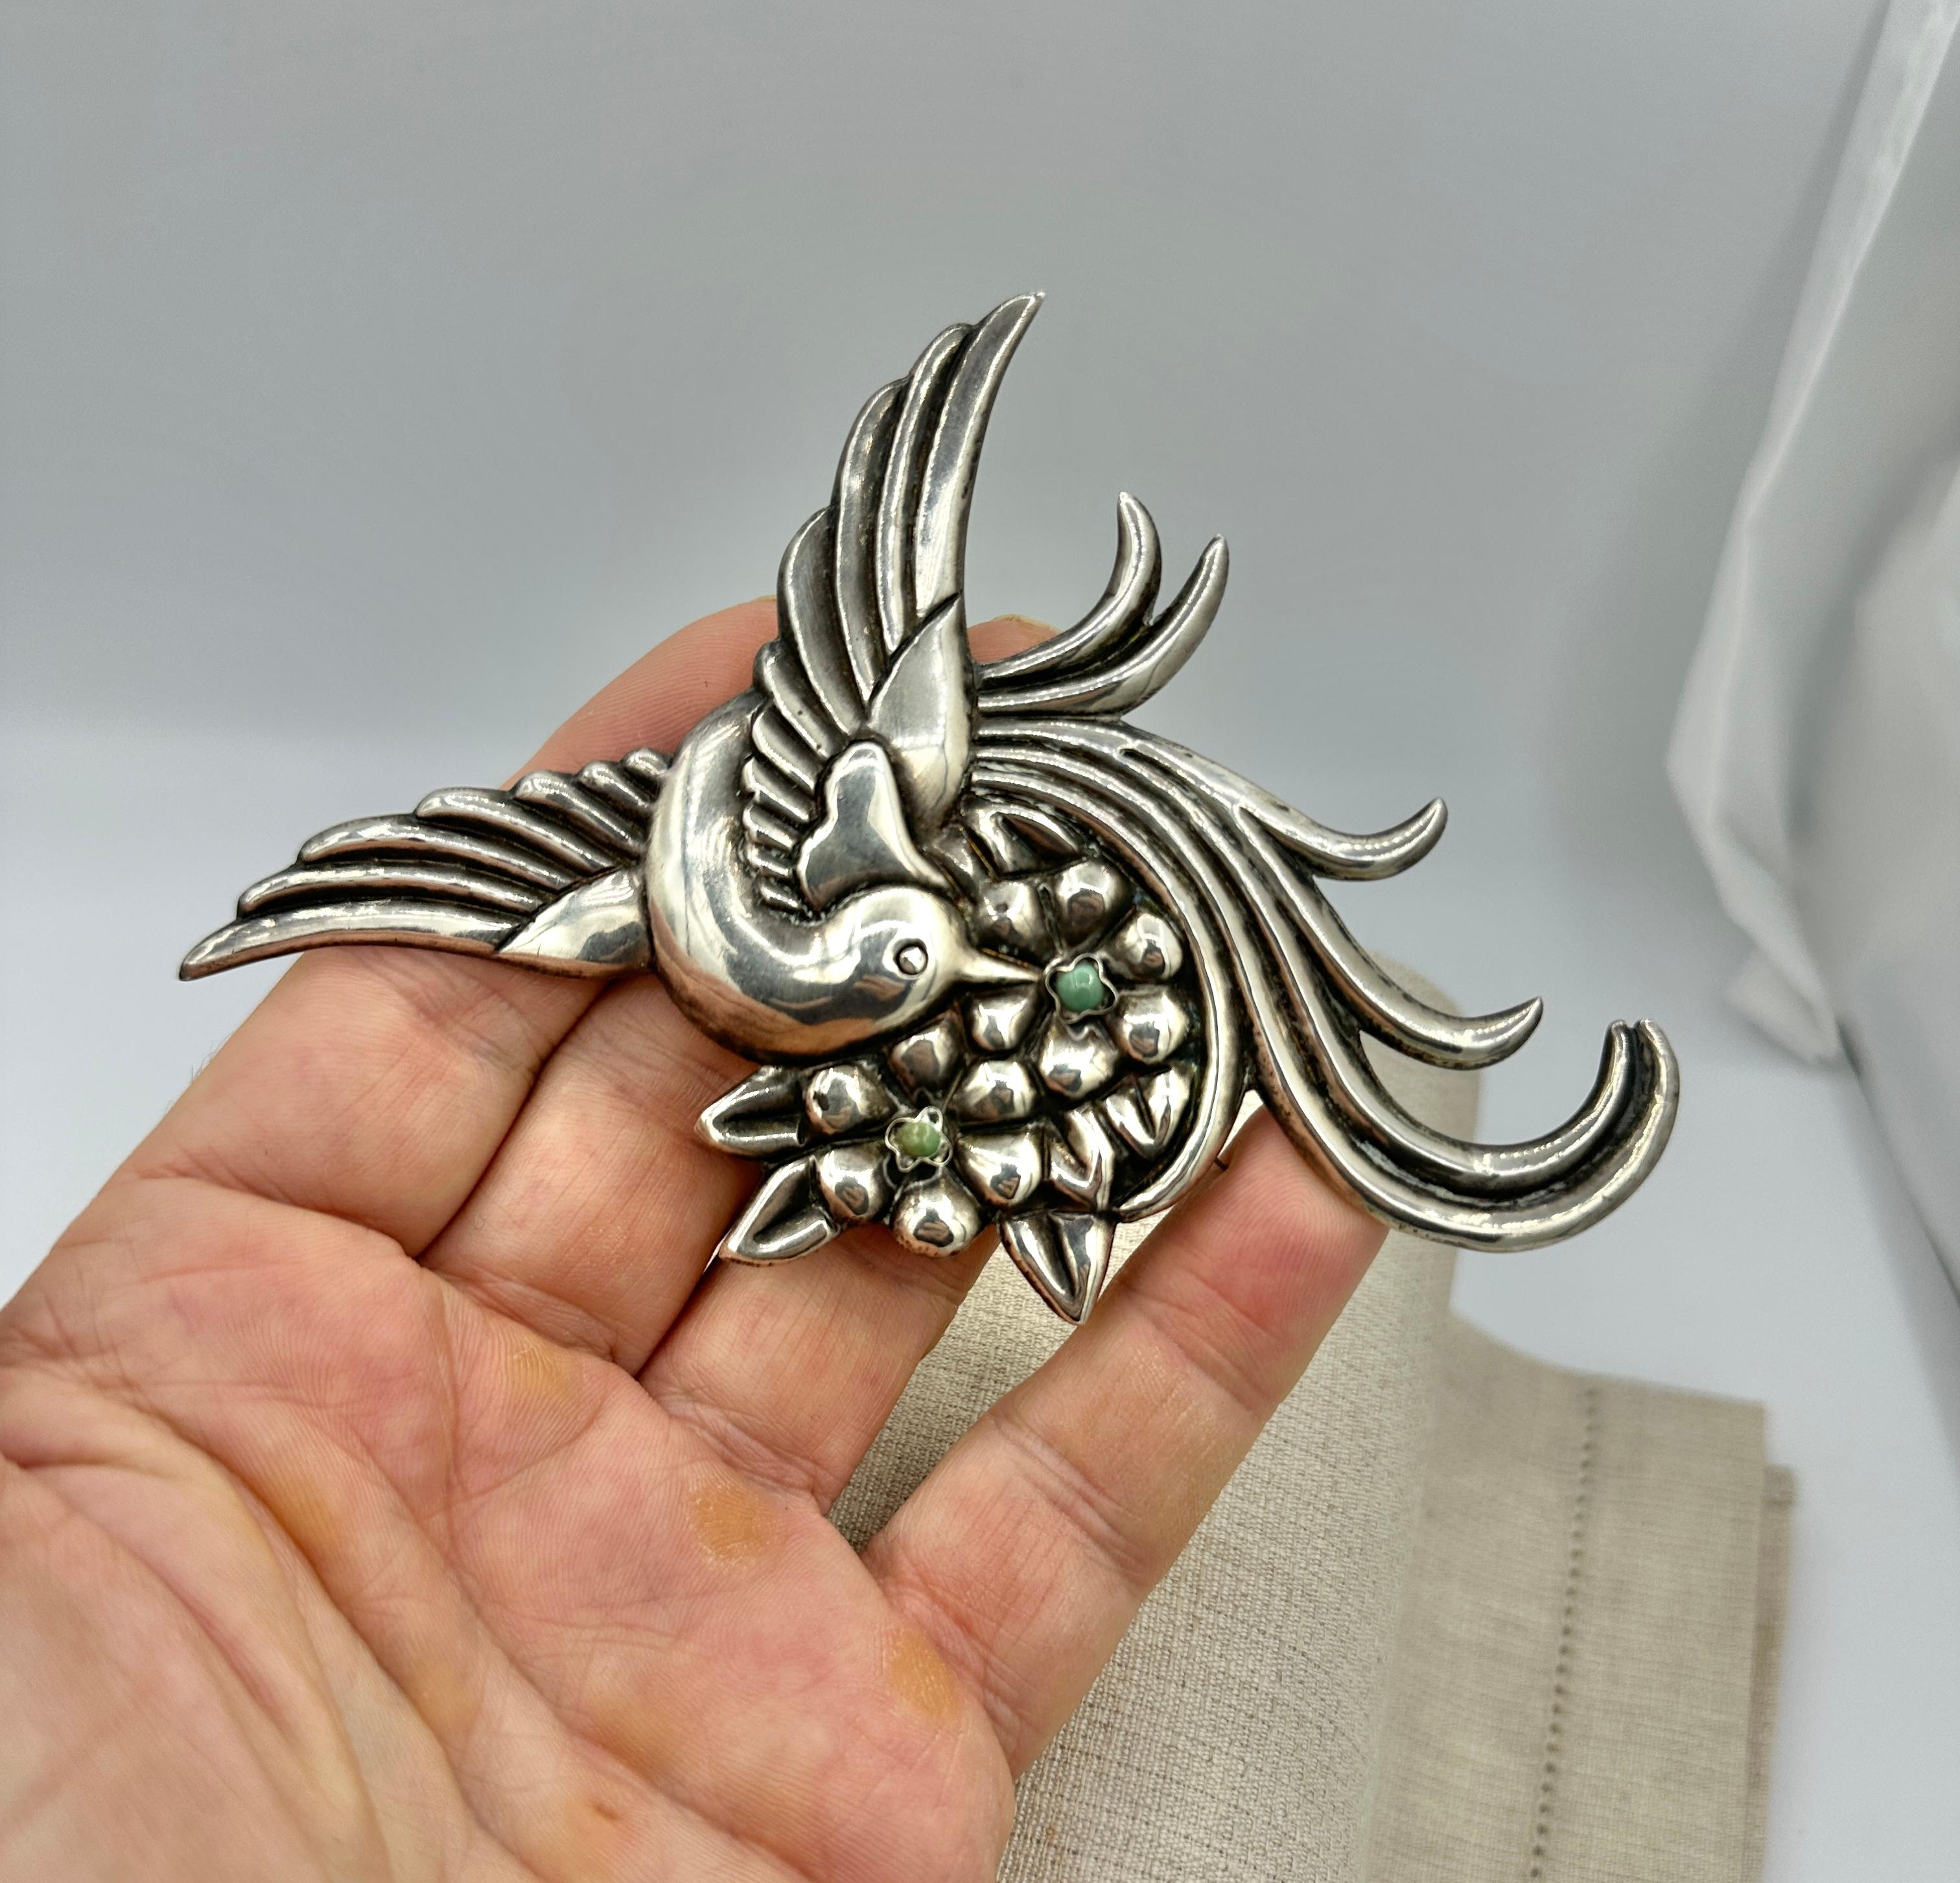 This is a stunning antique Casa Prieto Mexican Sterling Silver and natural Turquoise Brooch in the form of a magnificent Bird of Paradise with a Heart on a Flower Bouquet.  The brooch is a monumental 5 1/4 inches in length.  The deep repouse work is